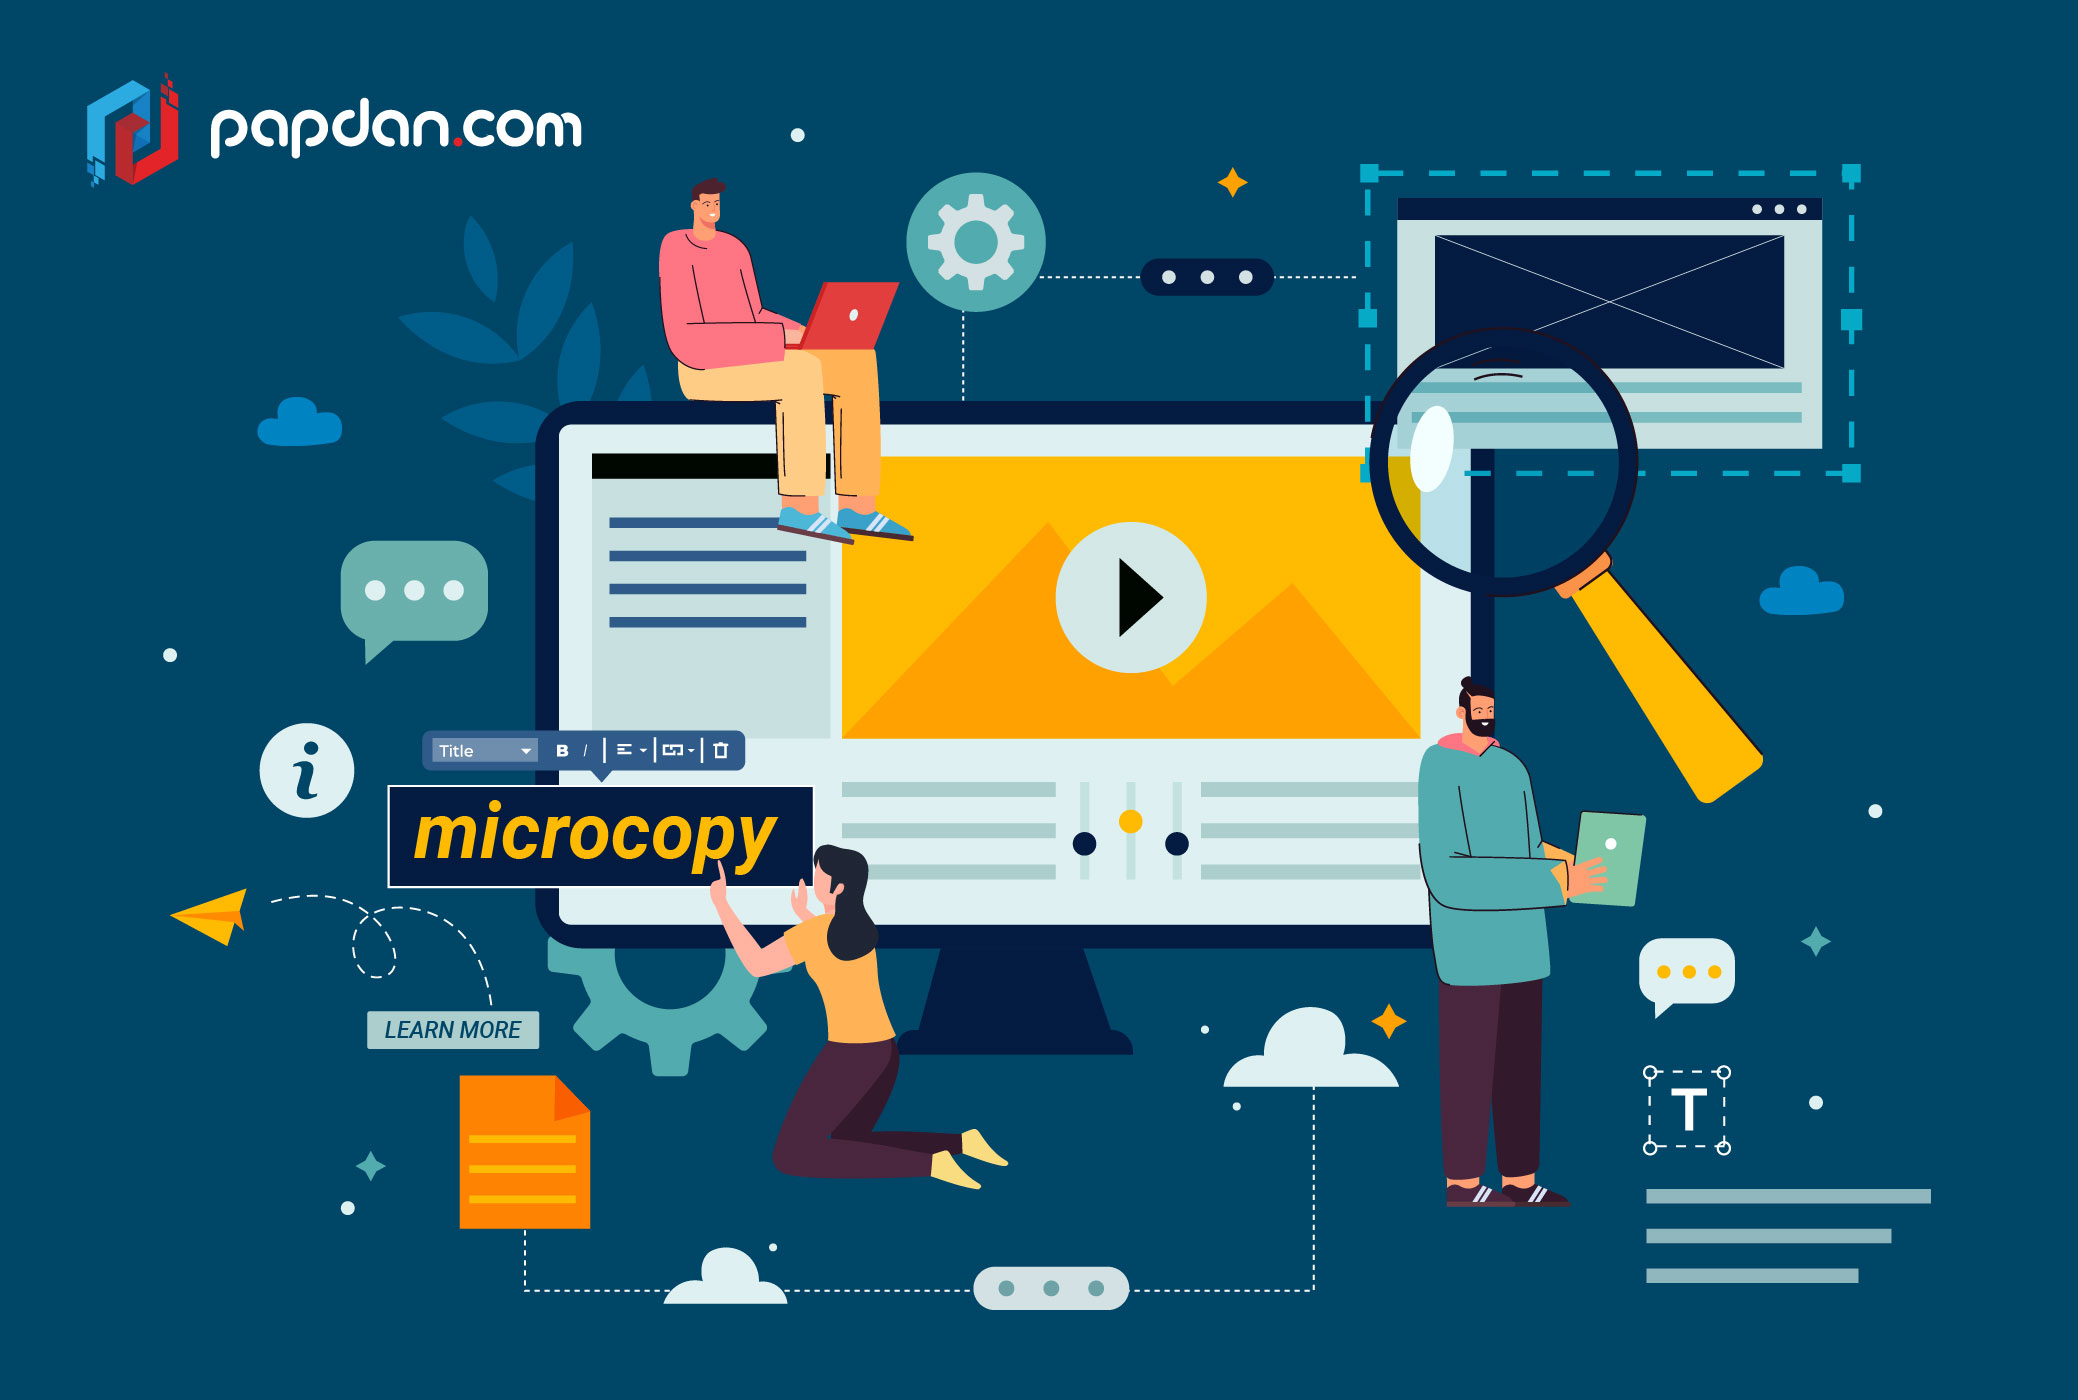 Use These 5 Tips to Create an Effective Microcopy